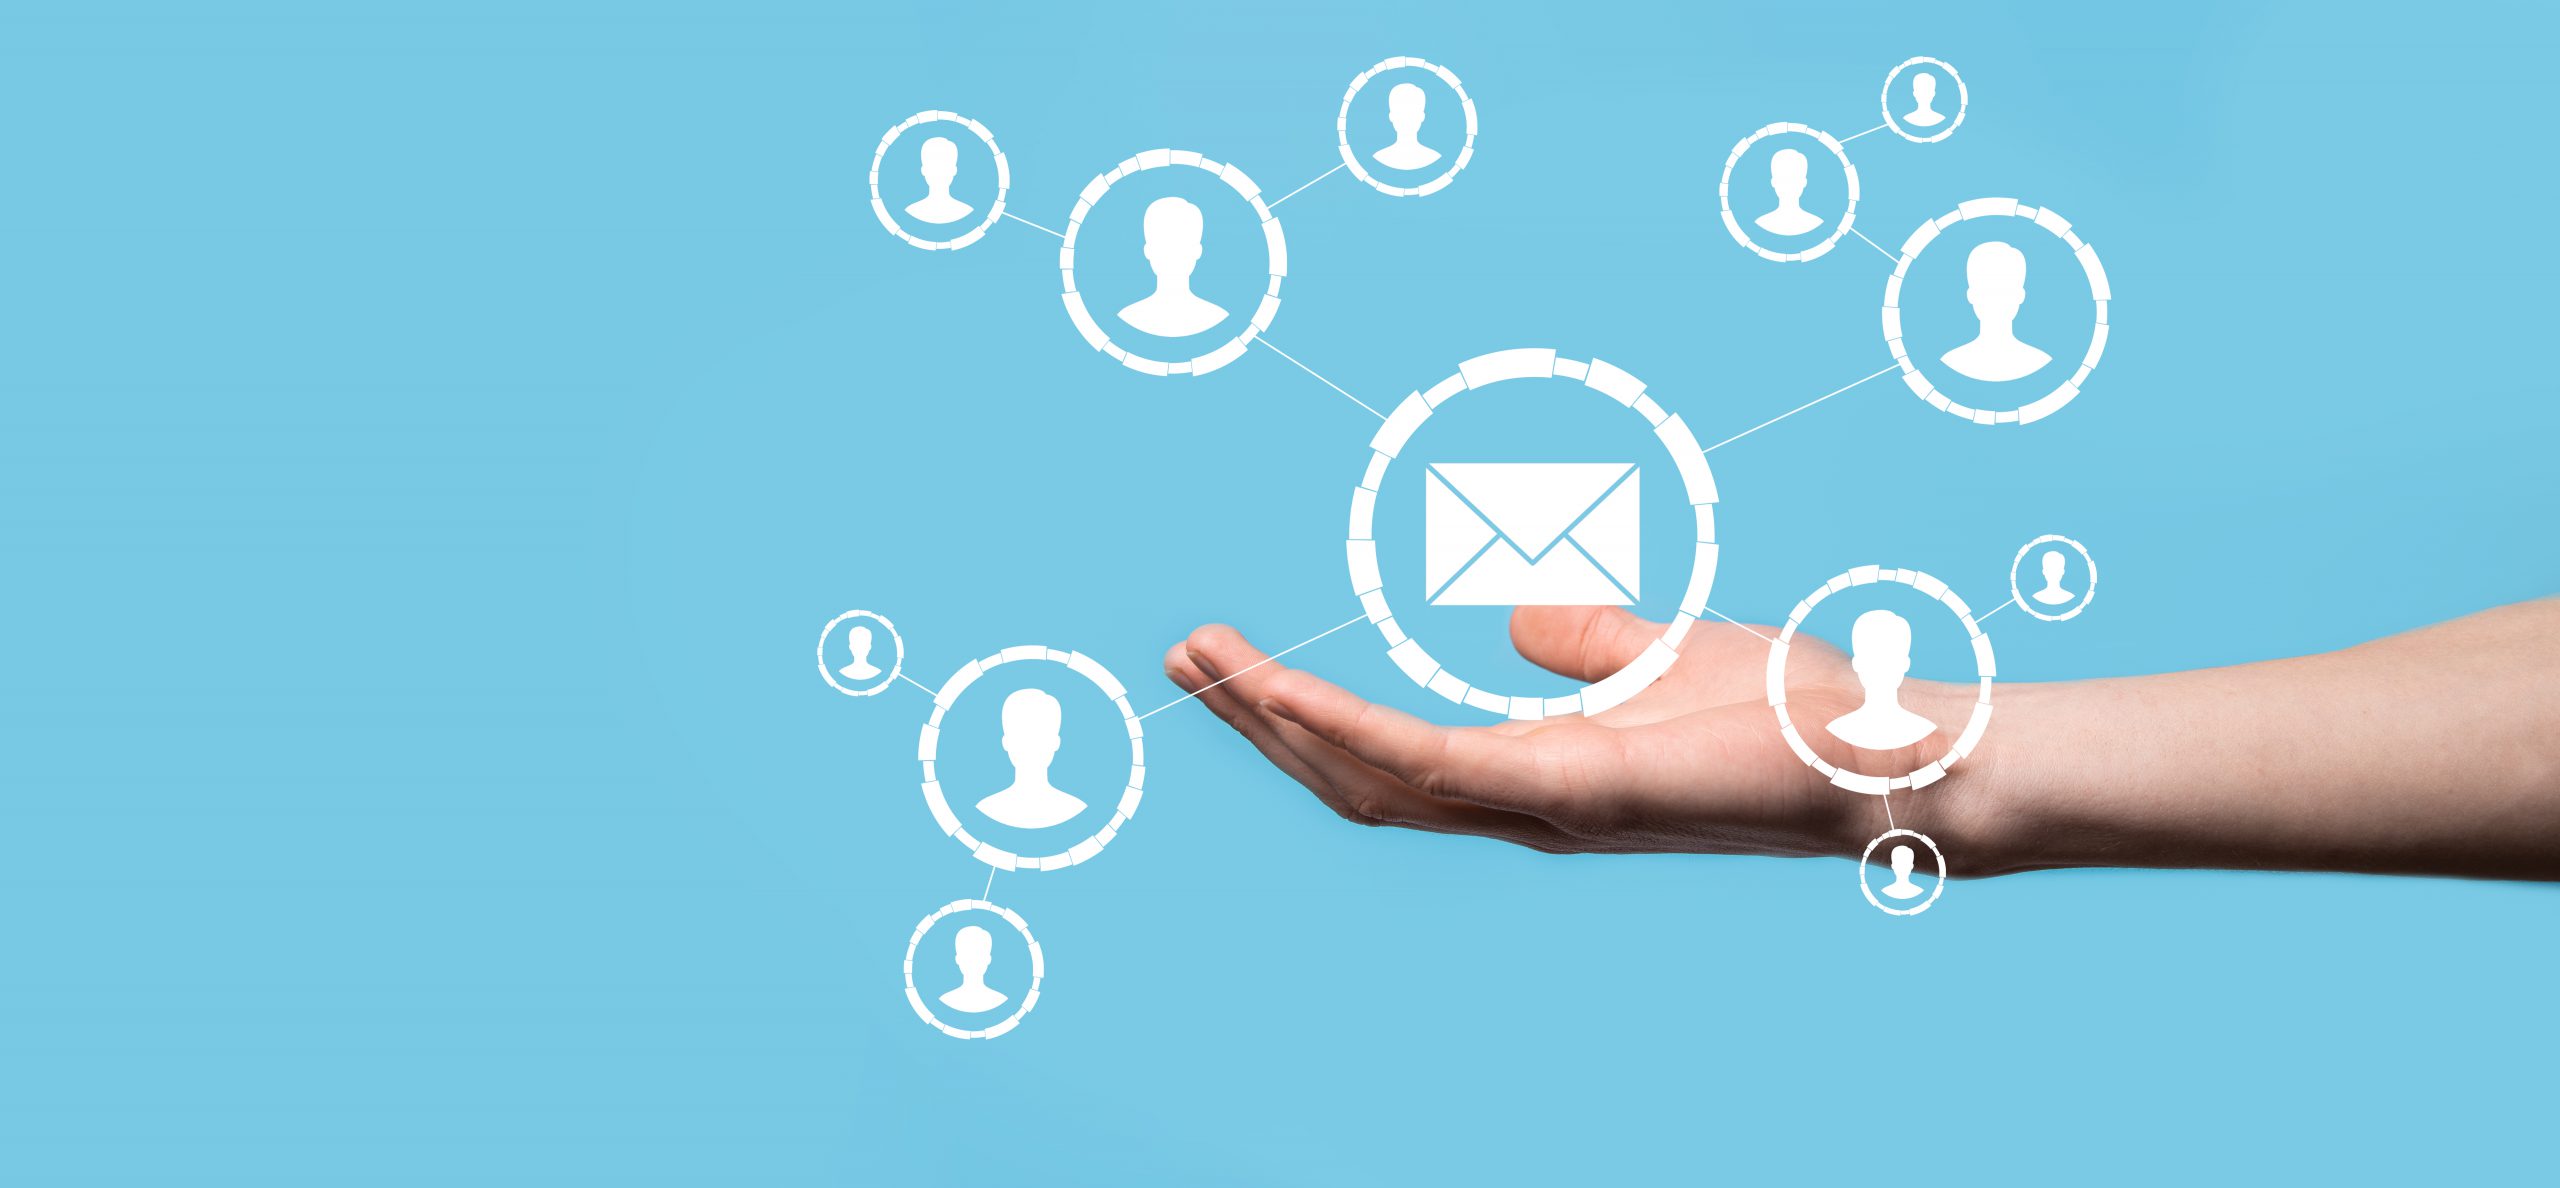 Learn about the novelties that may affect your email marketing strategy in 2022